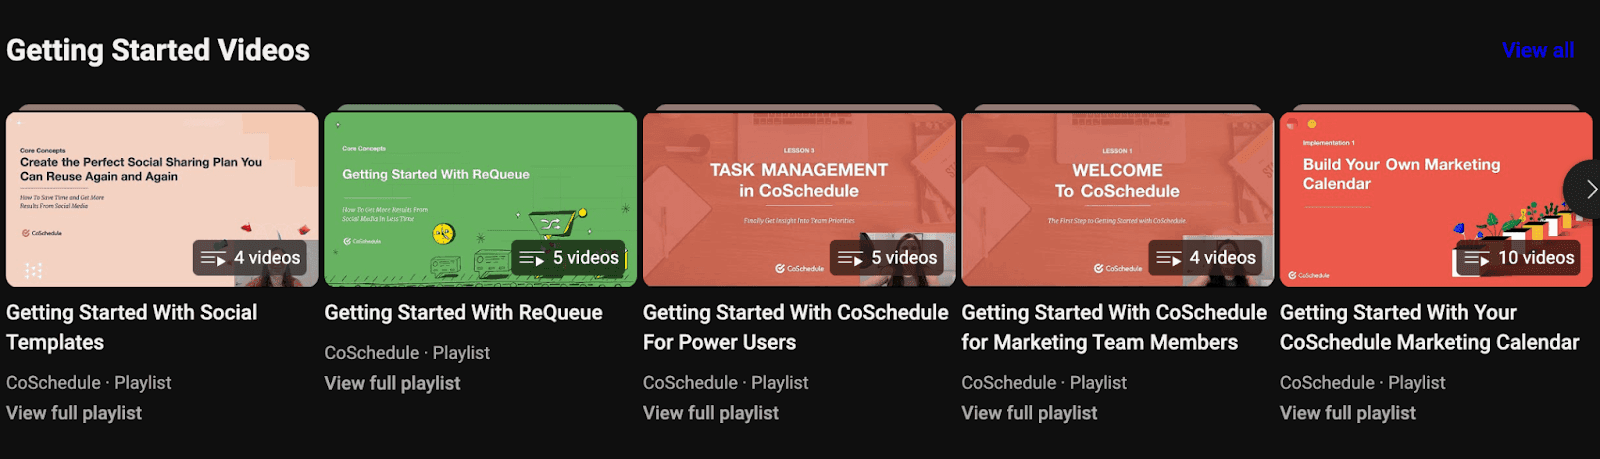 CoSchedule video playlists with thumbnails